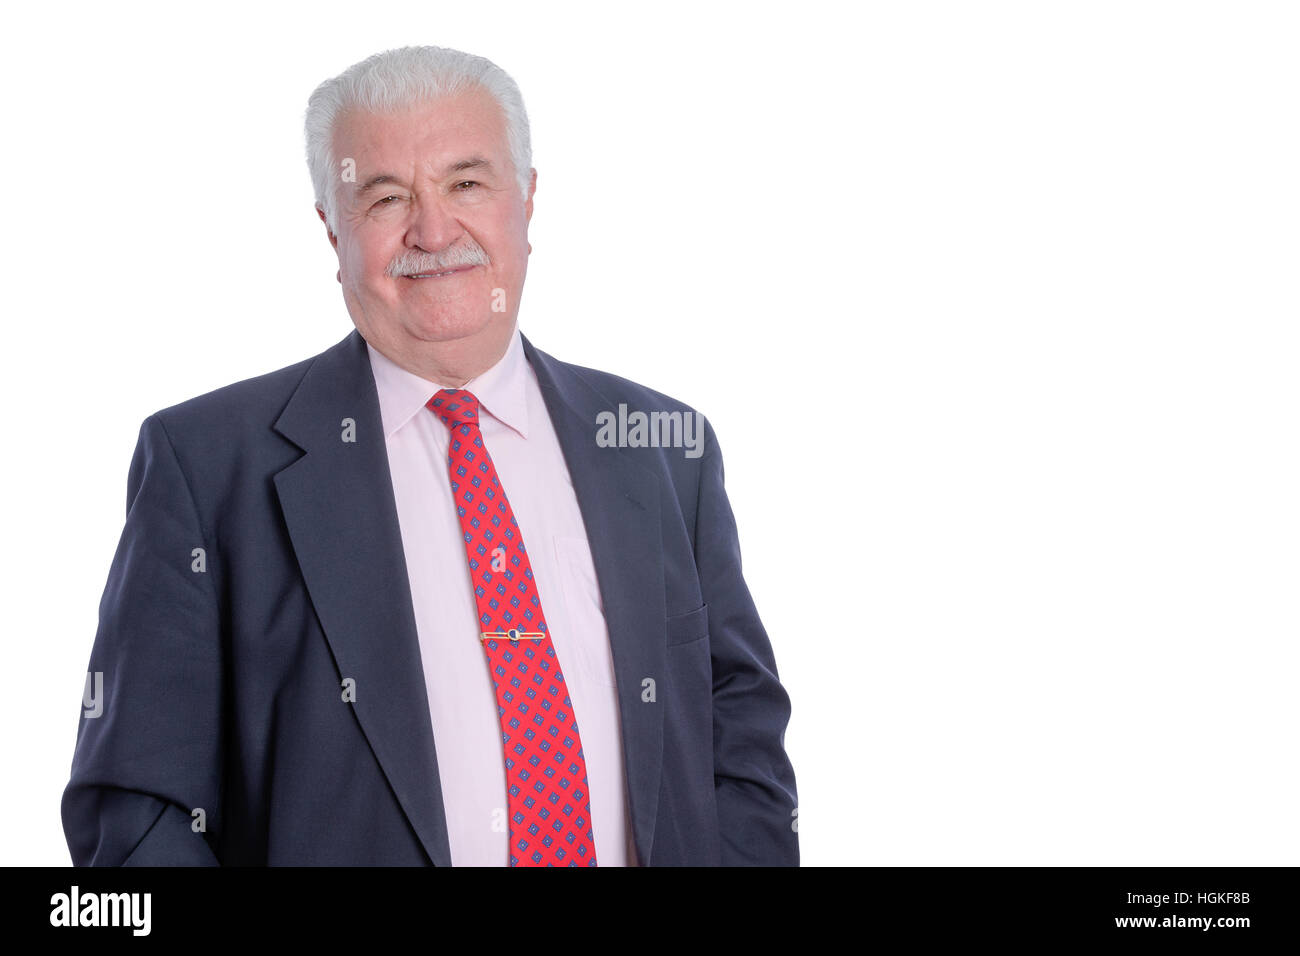 Half body portrait of smiling mature businessman in suit on white background with copy space Stock Photo